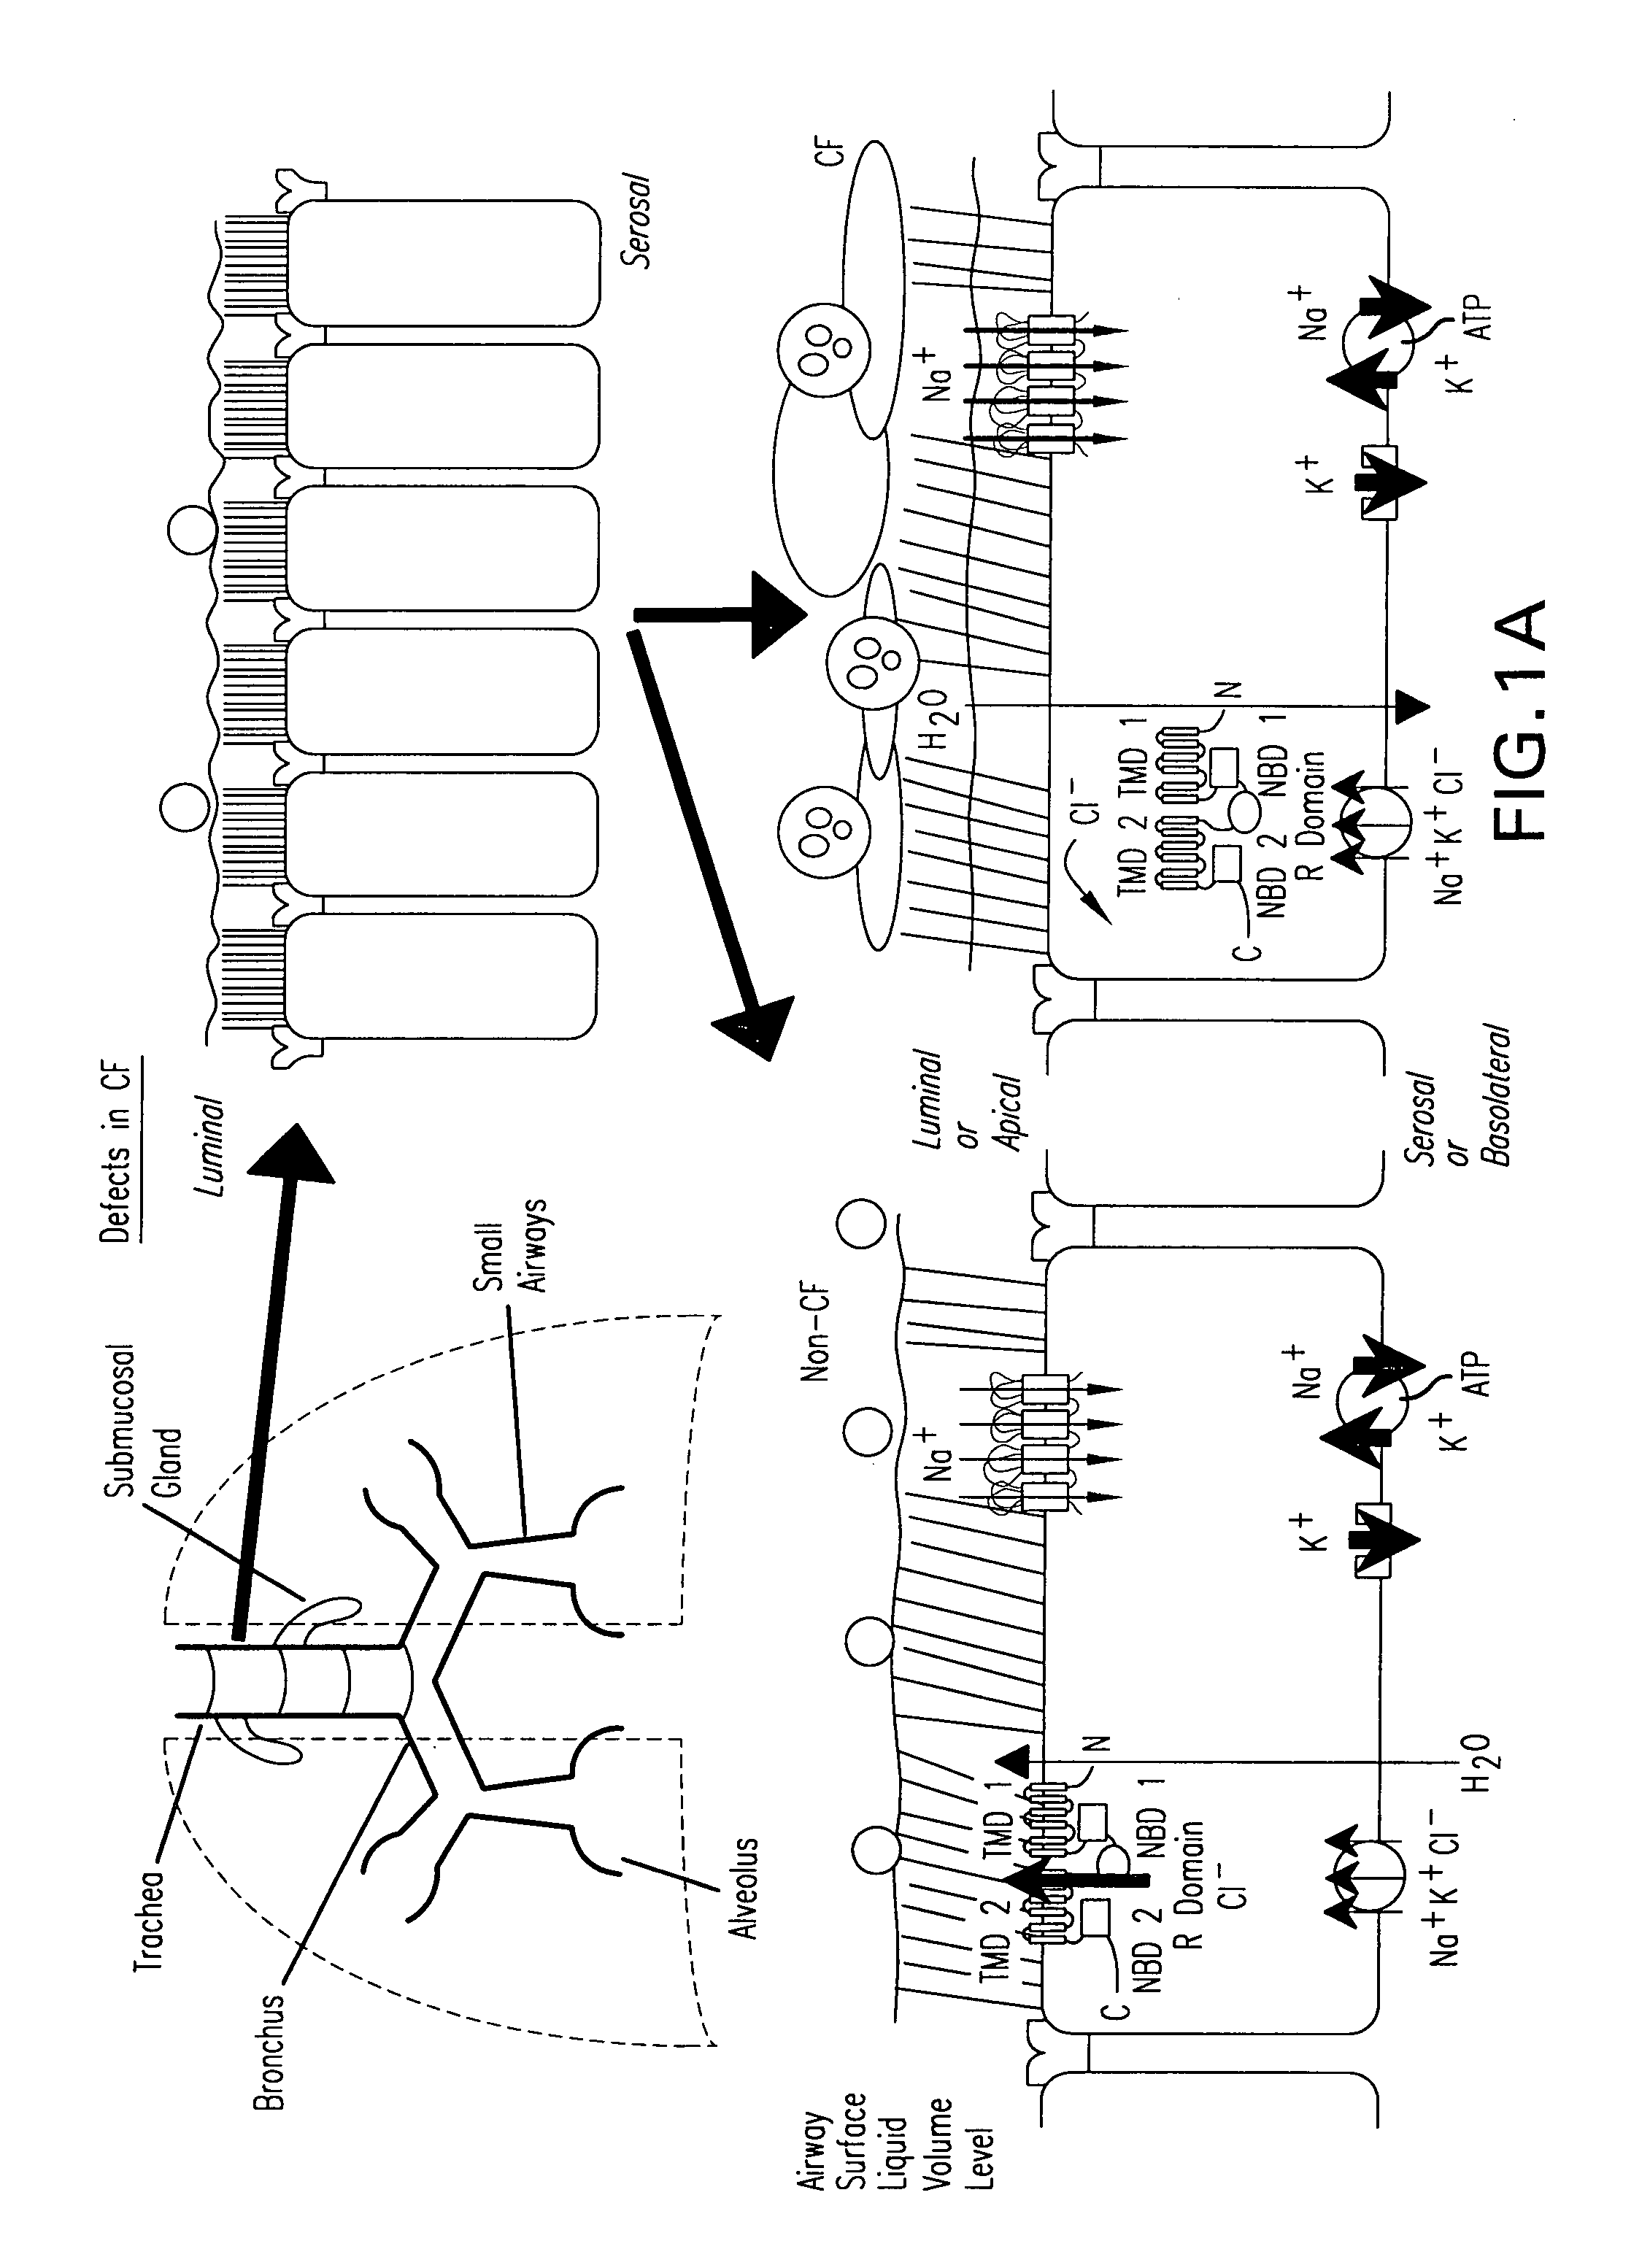 Methods and compositions for P2X receptor calcium entry channels and other calcium entry mechanisms